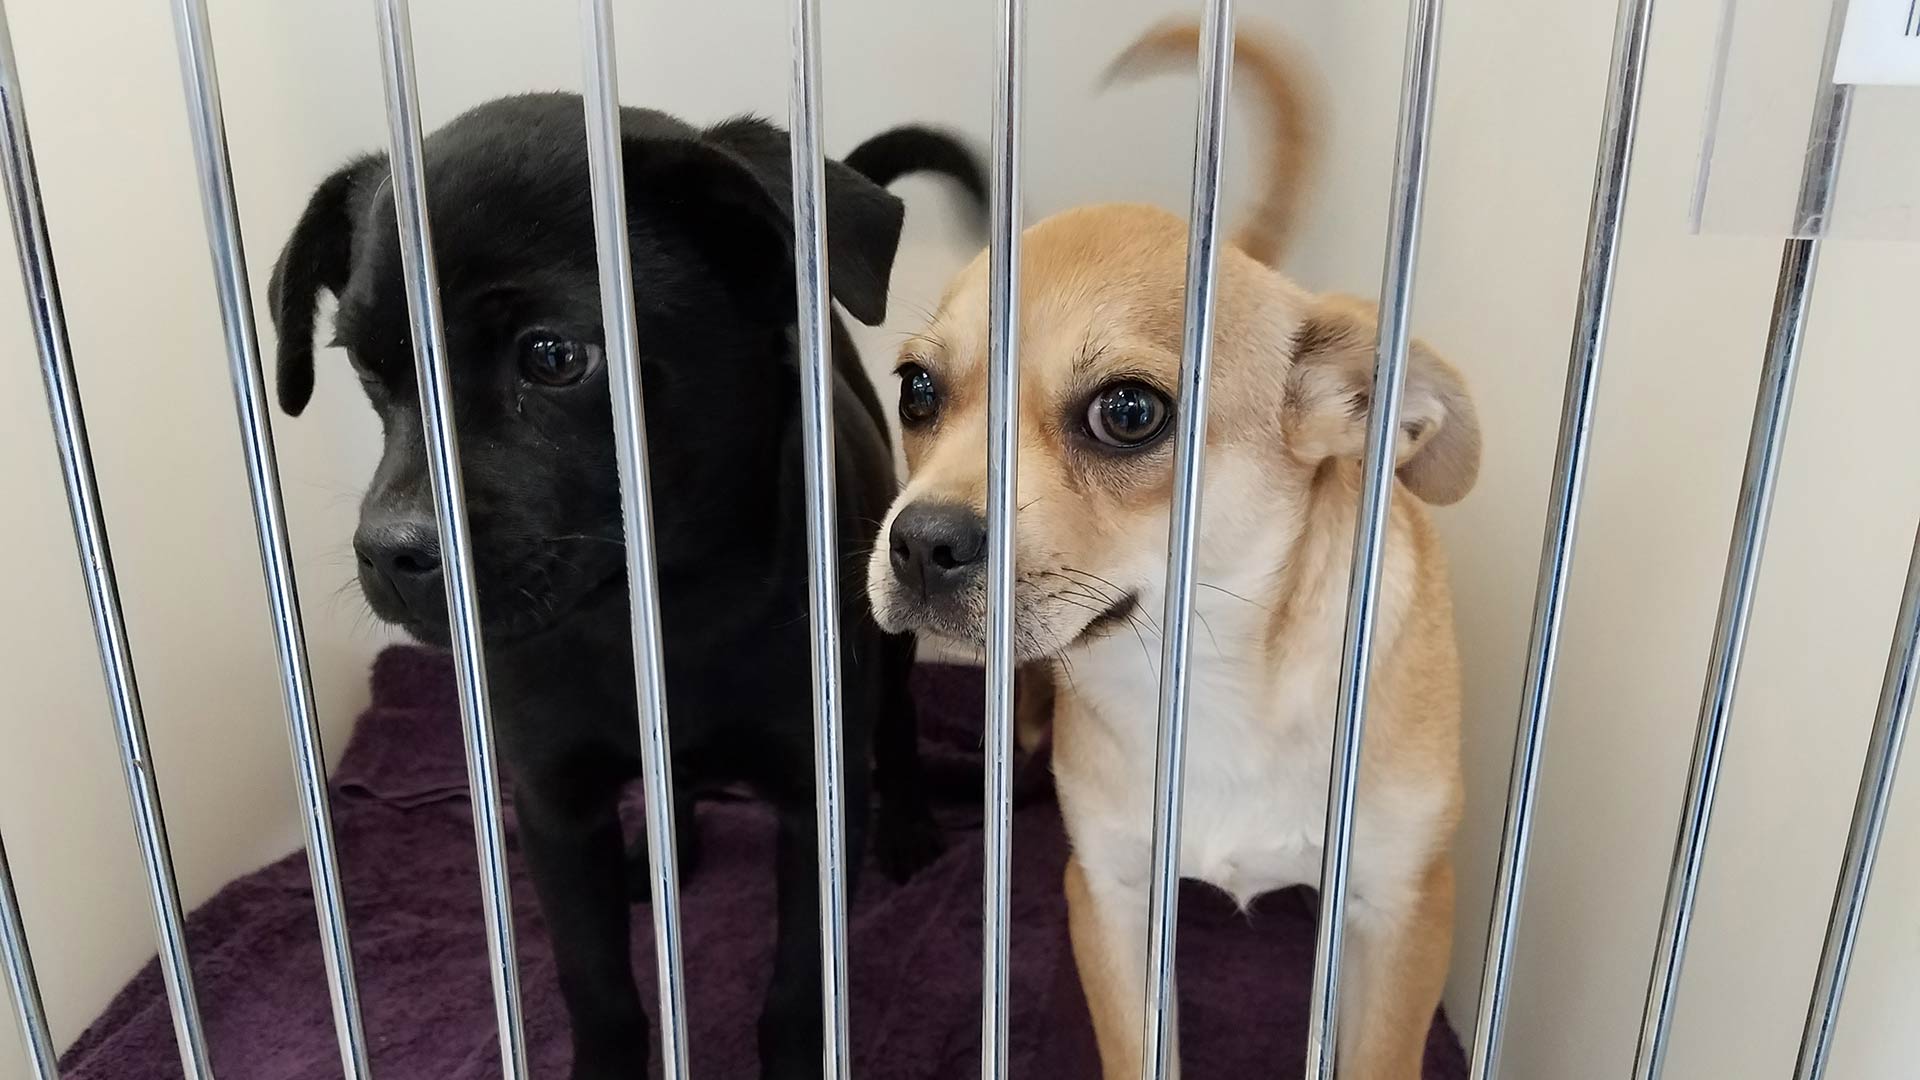 Two puppies housed in the small dogs unit of the new Pima Animal Care Center.